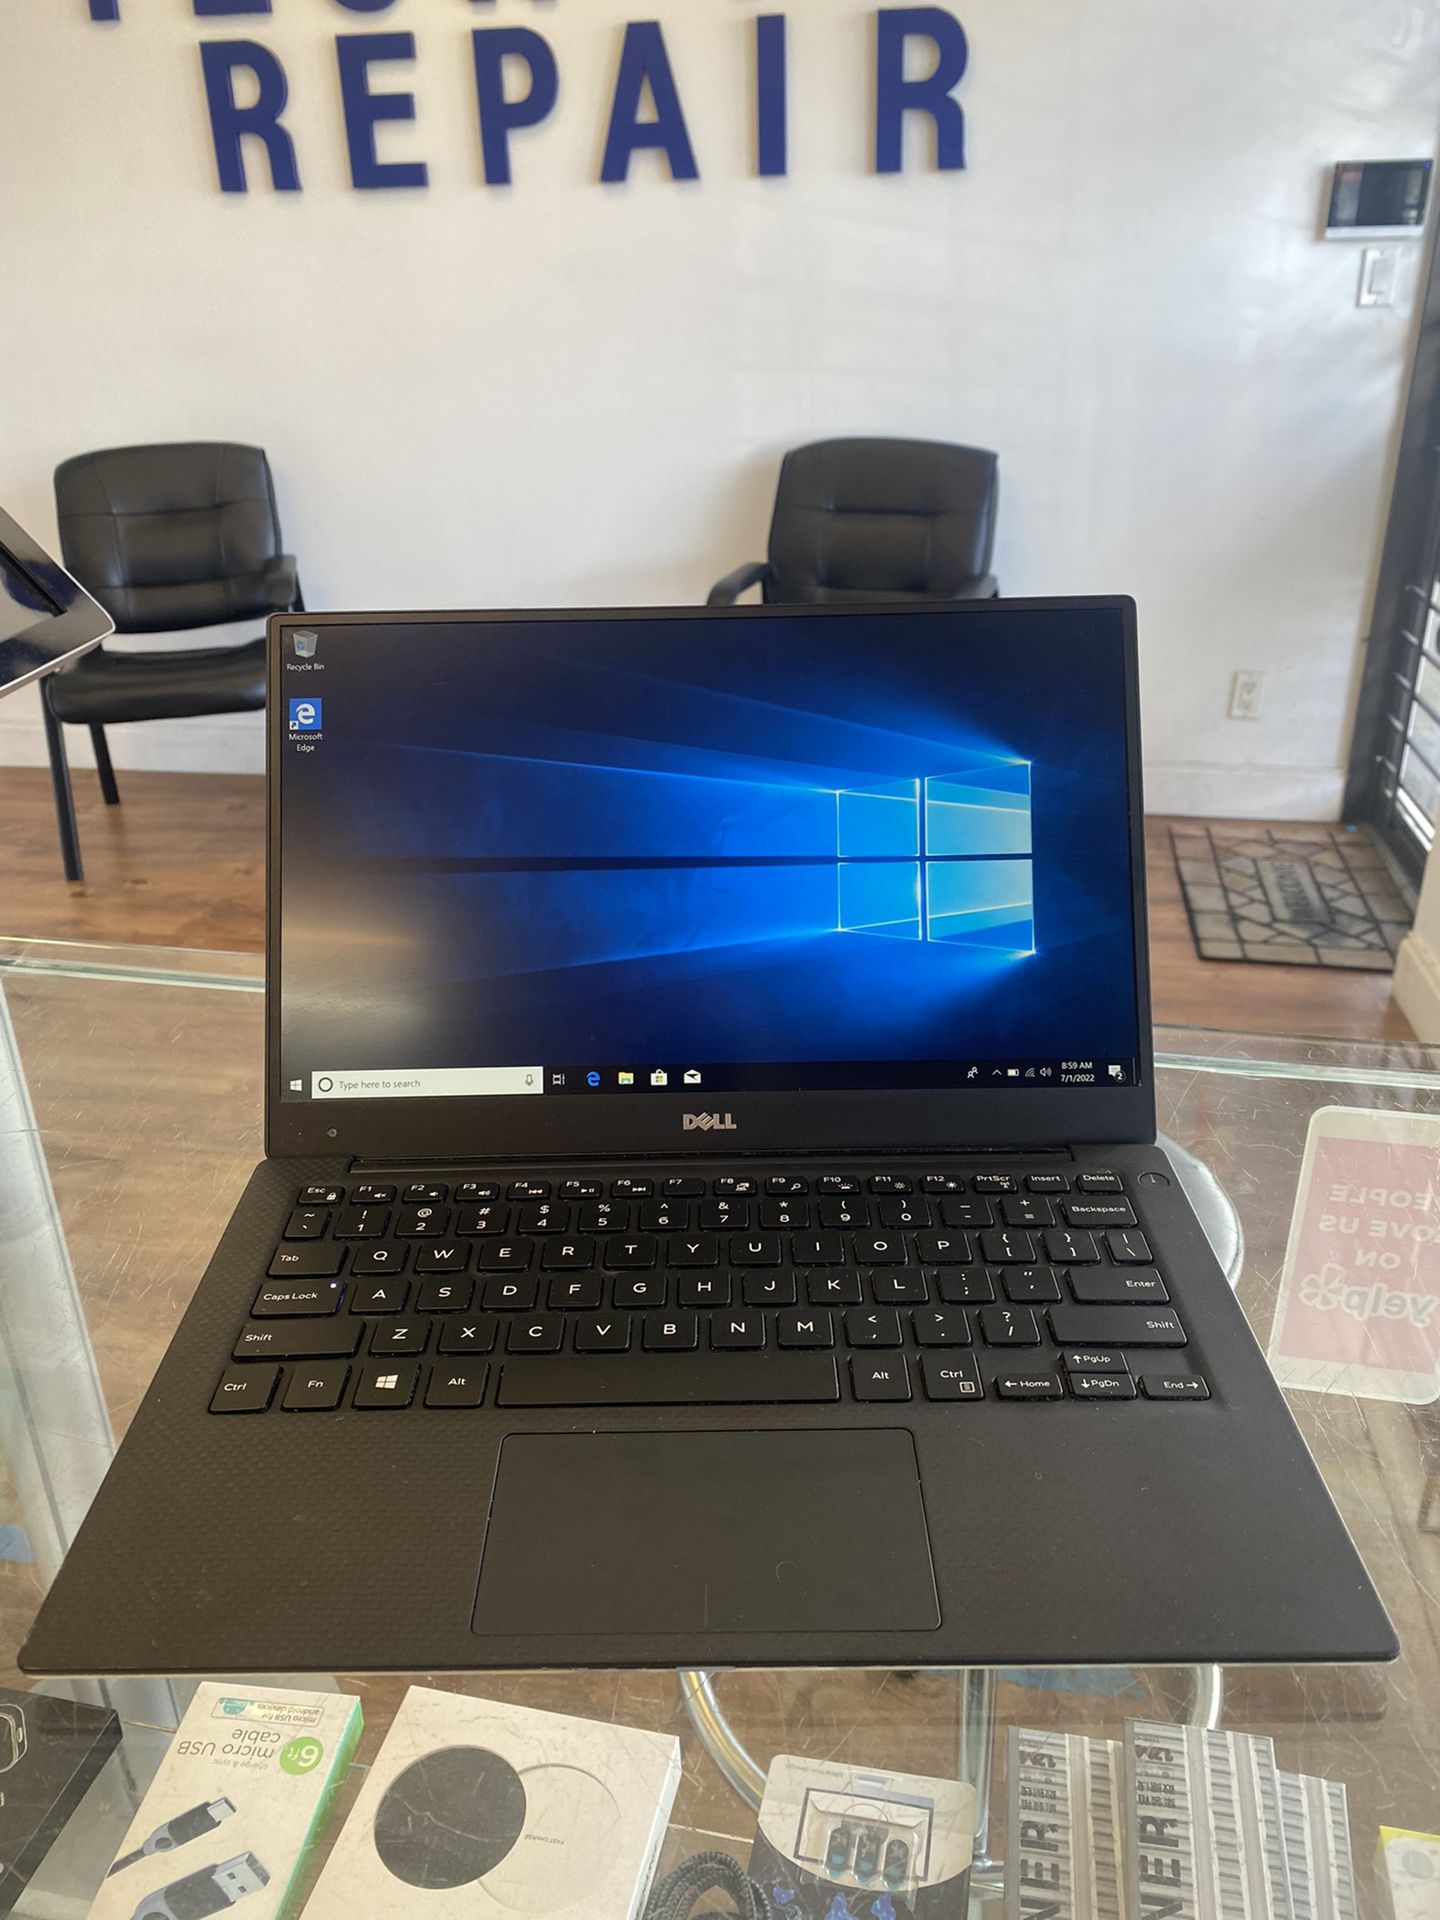 Dell XPS 13 9350 13.3” Laptop, i5, 8GB RAM, 128GB SSD. In great condition